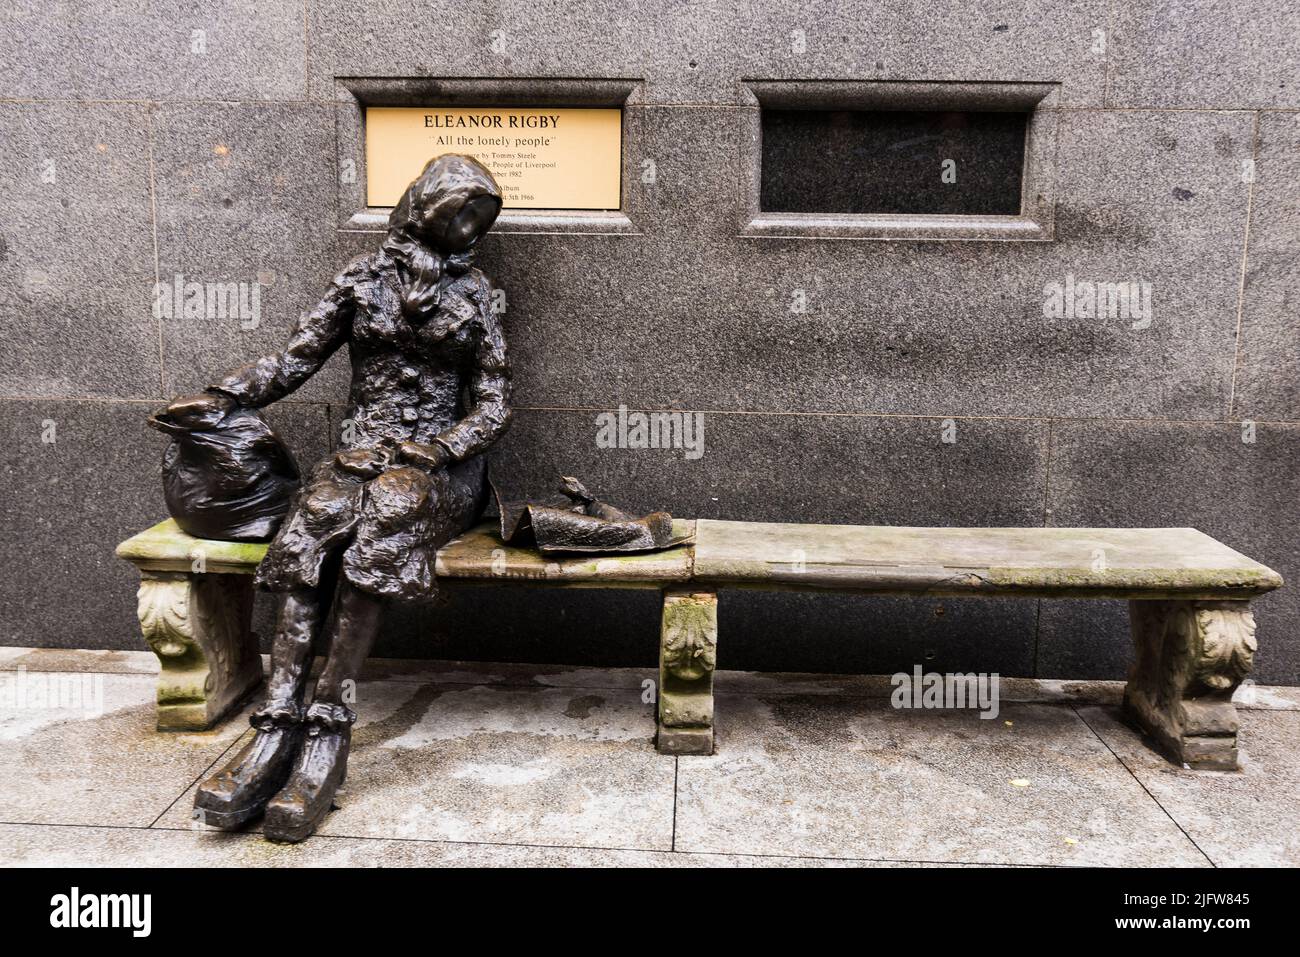 Eleanor Rigby is a statue in Stanley Street, Liverpool, designed and made by the entertainer Tommy Steele. It is based on the subject of The Beatles' Stock Photo